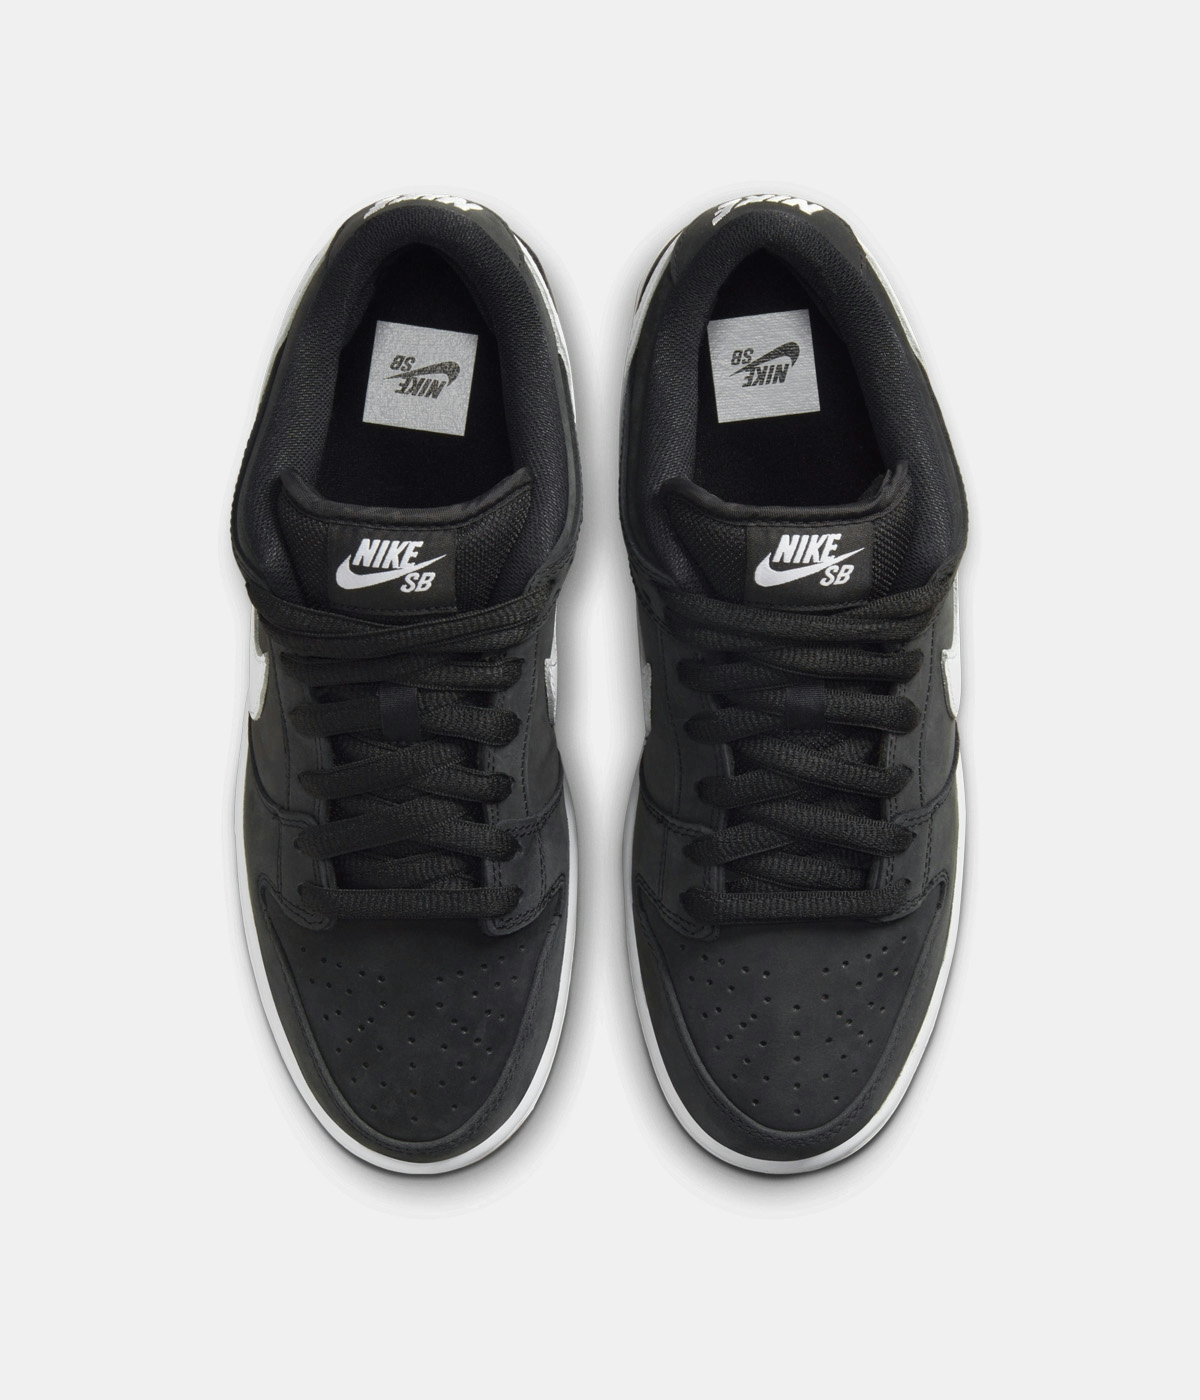 Vintage & Second Hand Nike SB - Dunk Low Pro Sneakers Black/White 5